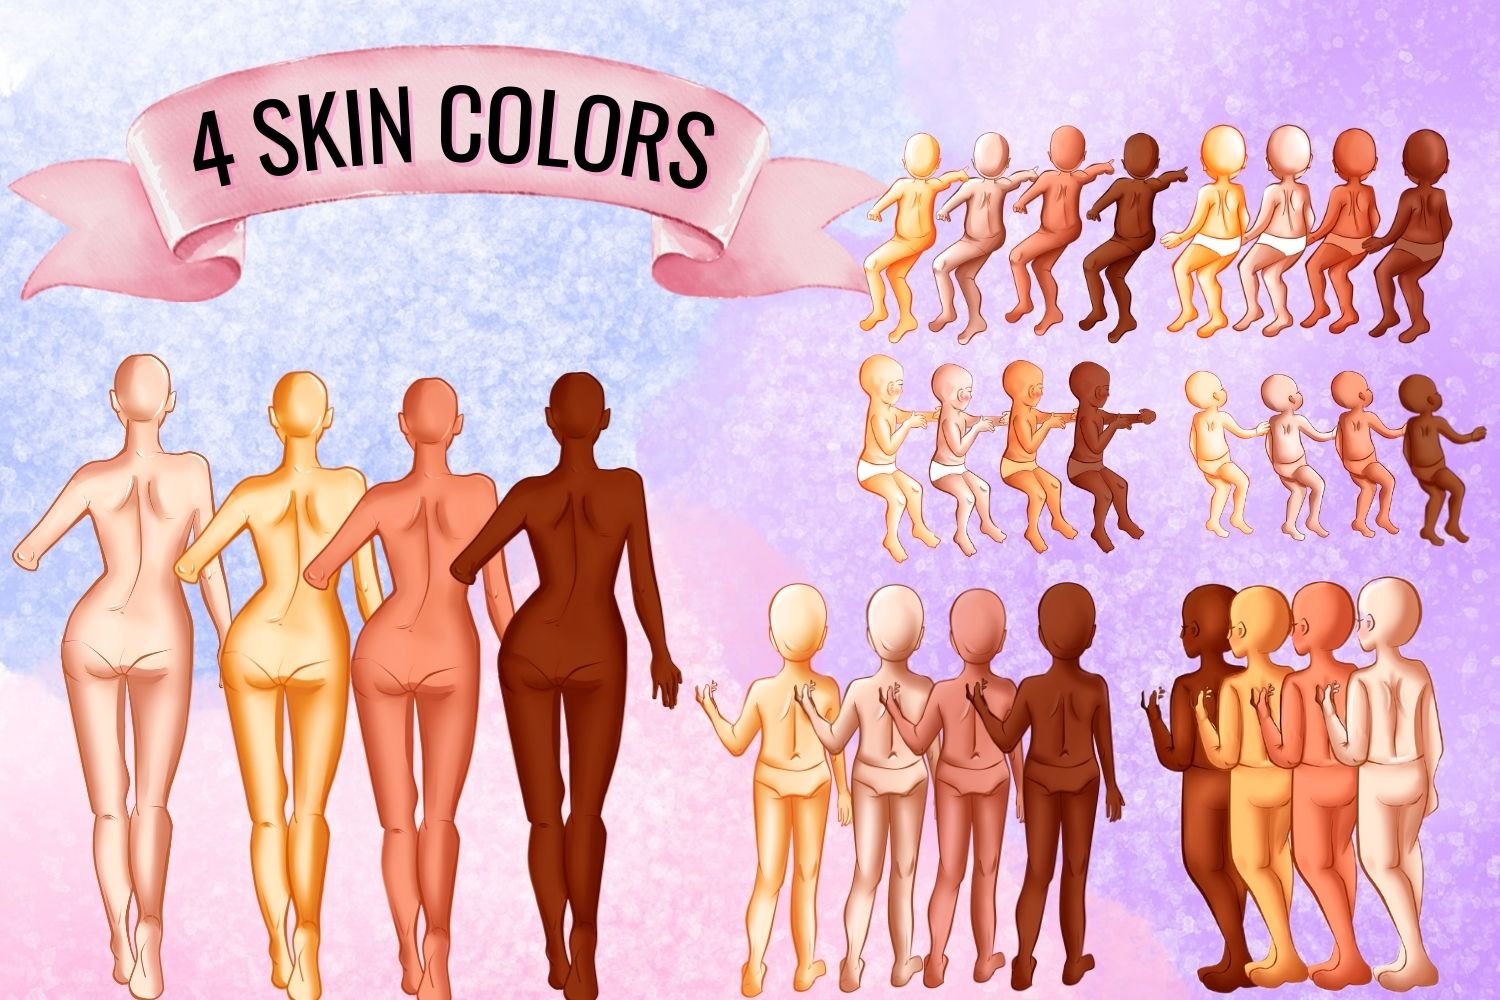 Diverse of skin colors.